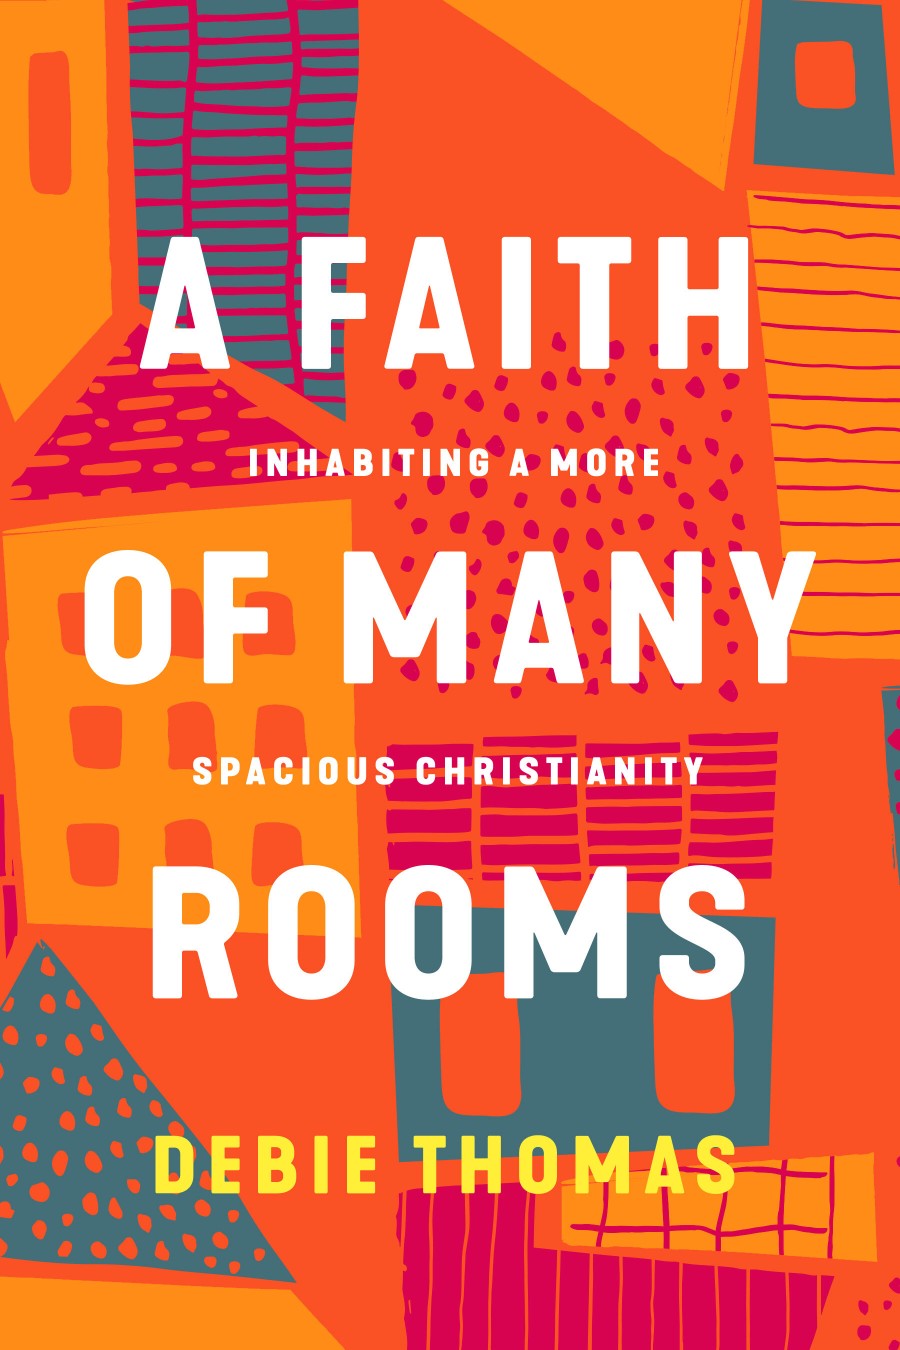 opening the door to a ‘faith of many rooms’